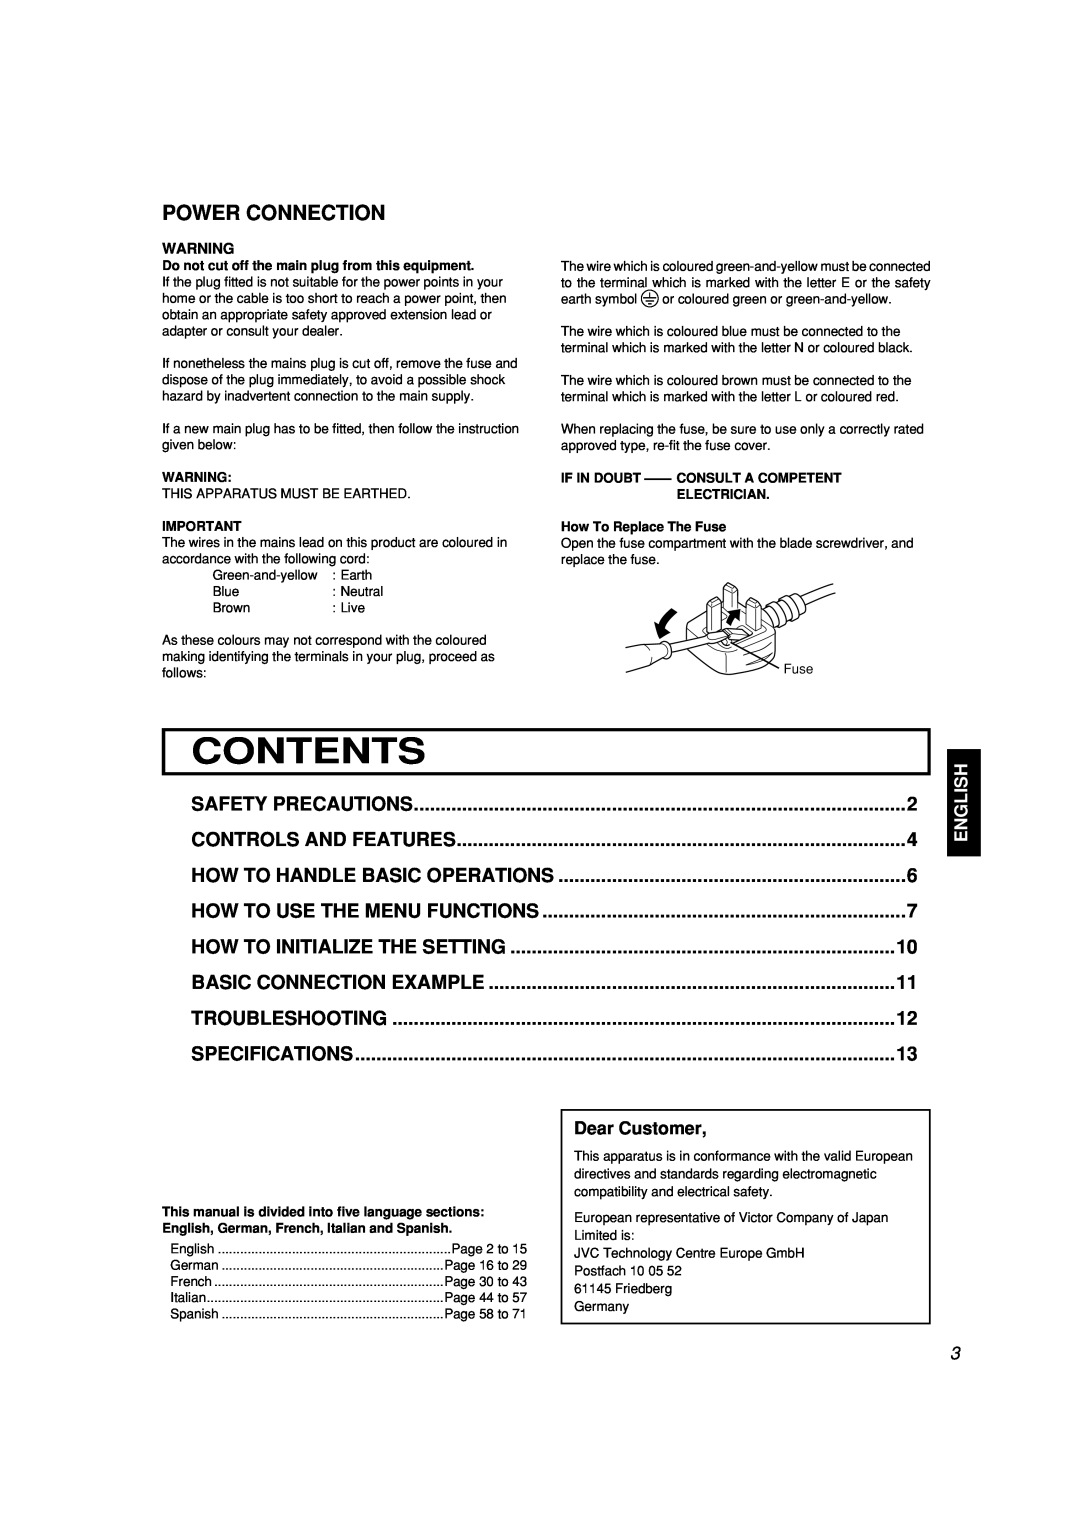 JVC LCT2142-001A-H Contents, Power Connection, How To Initialize The Setting, Basic Connection Example, Safety Precautions 